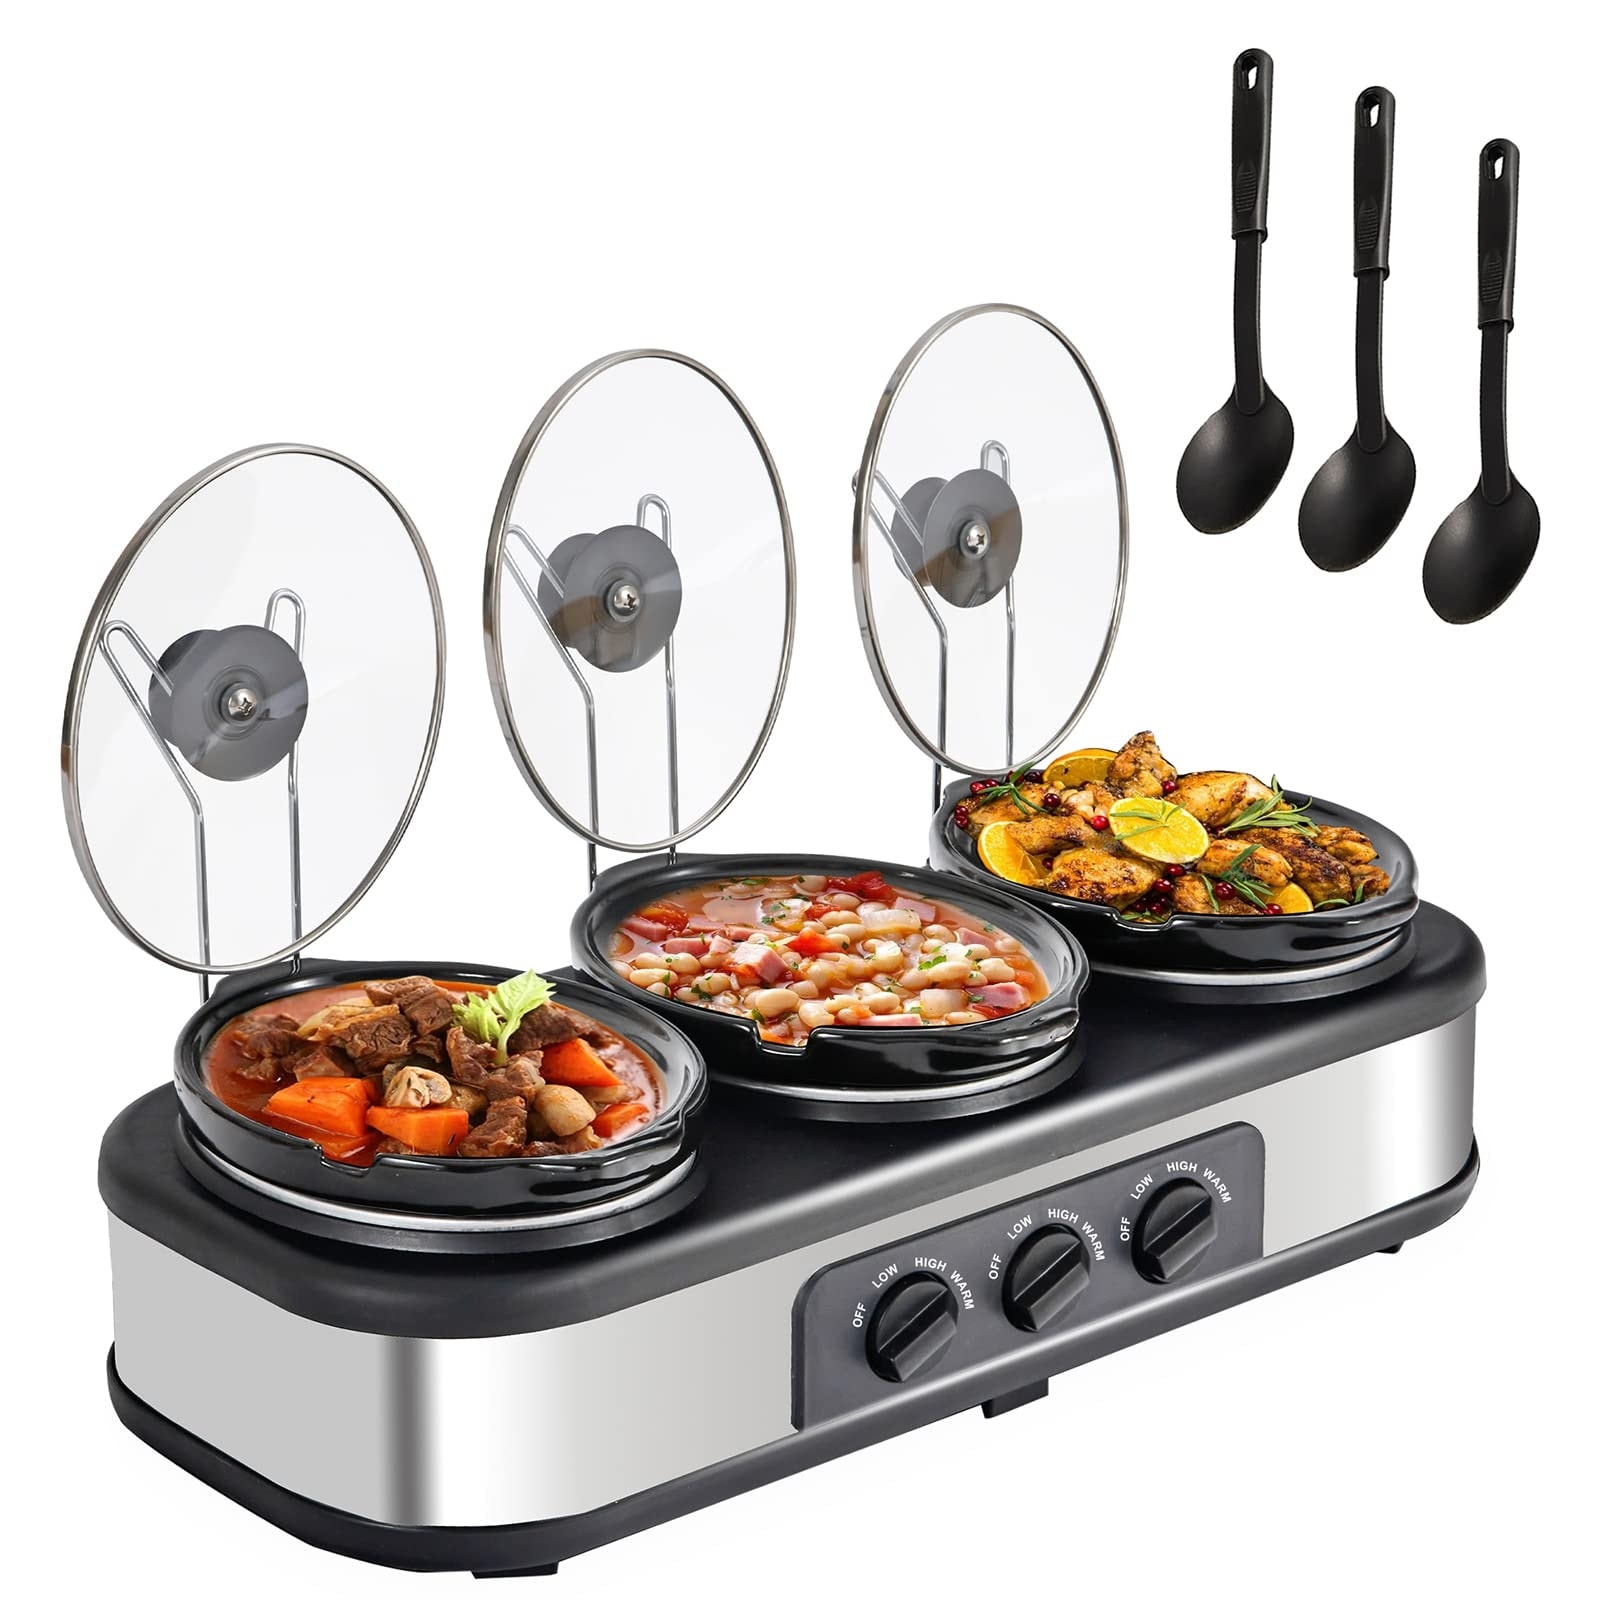 Triple Slow Cooker Buffet Servers and Warmer,3 Pot Food Mini Manual Slow  Cooker with Adjustable Temp, Lid Rests, Ceramic Pot - Bed Bath & Beyond -  39589293